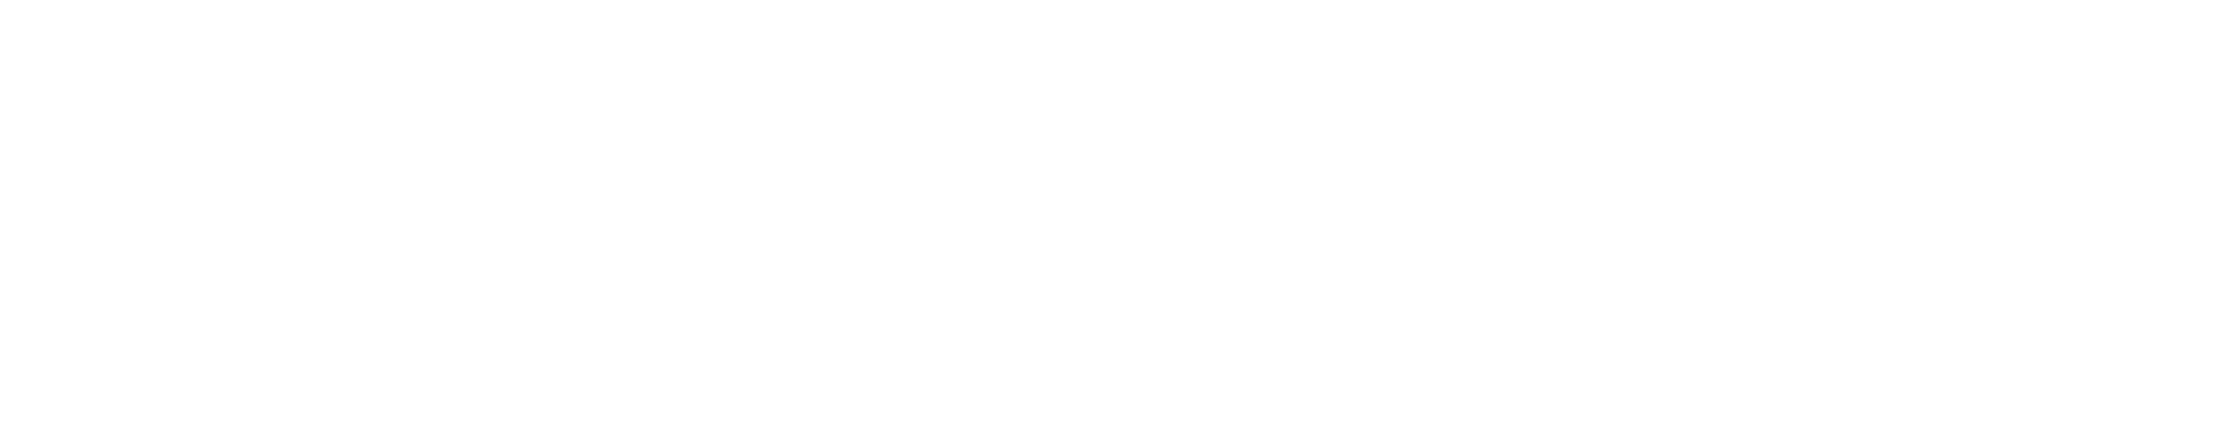 The Hildebrand Department of Petroleum and Geosystems Engineering at The University of Texas at Austin